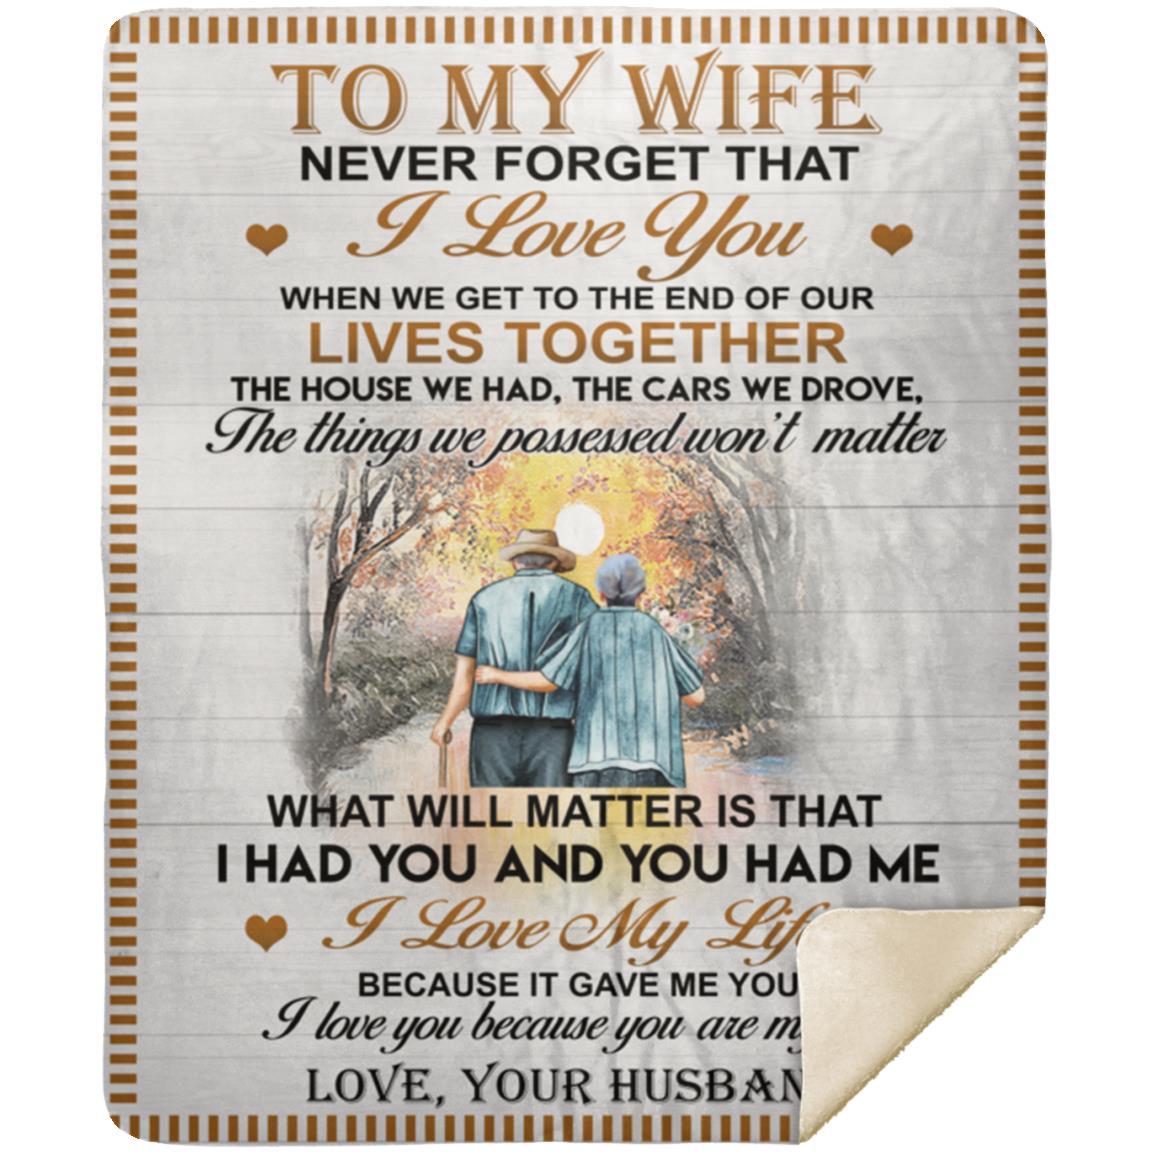 [LIMITED SUPPLIES REMAIN ] To my Wife - Love You Forever